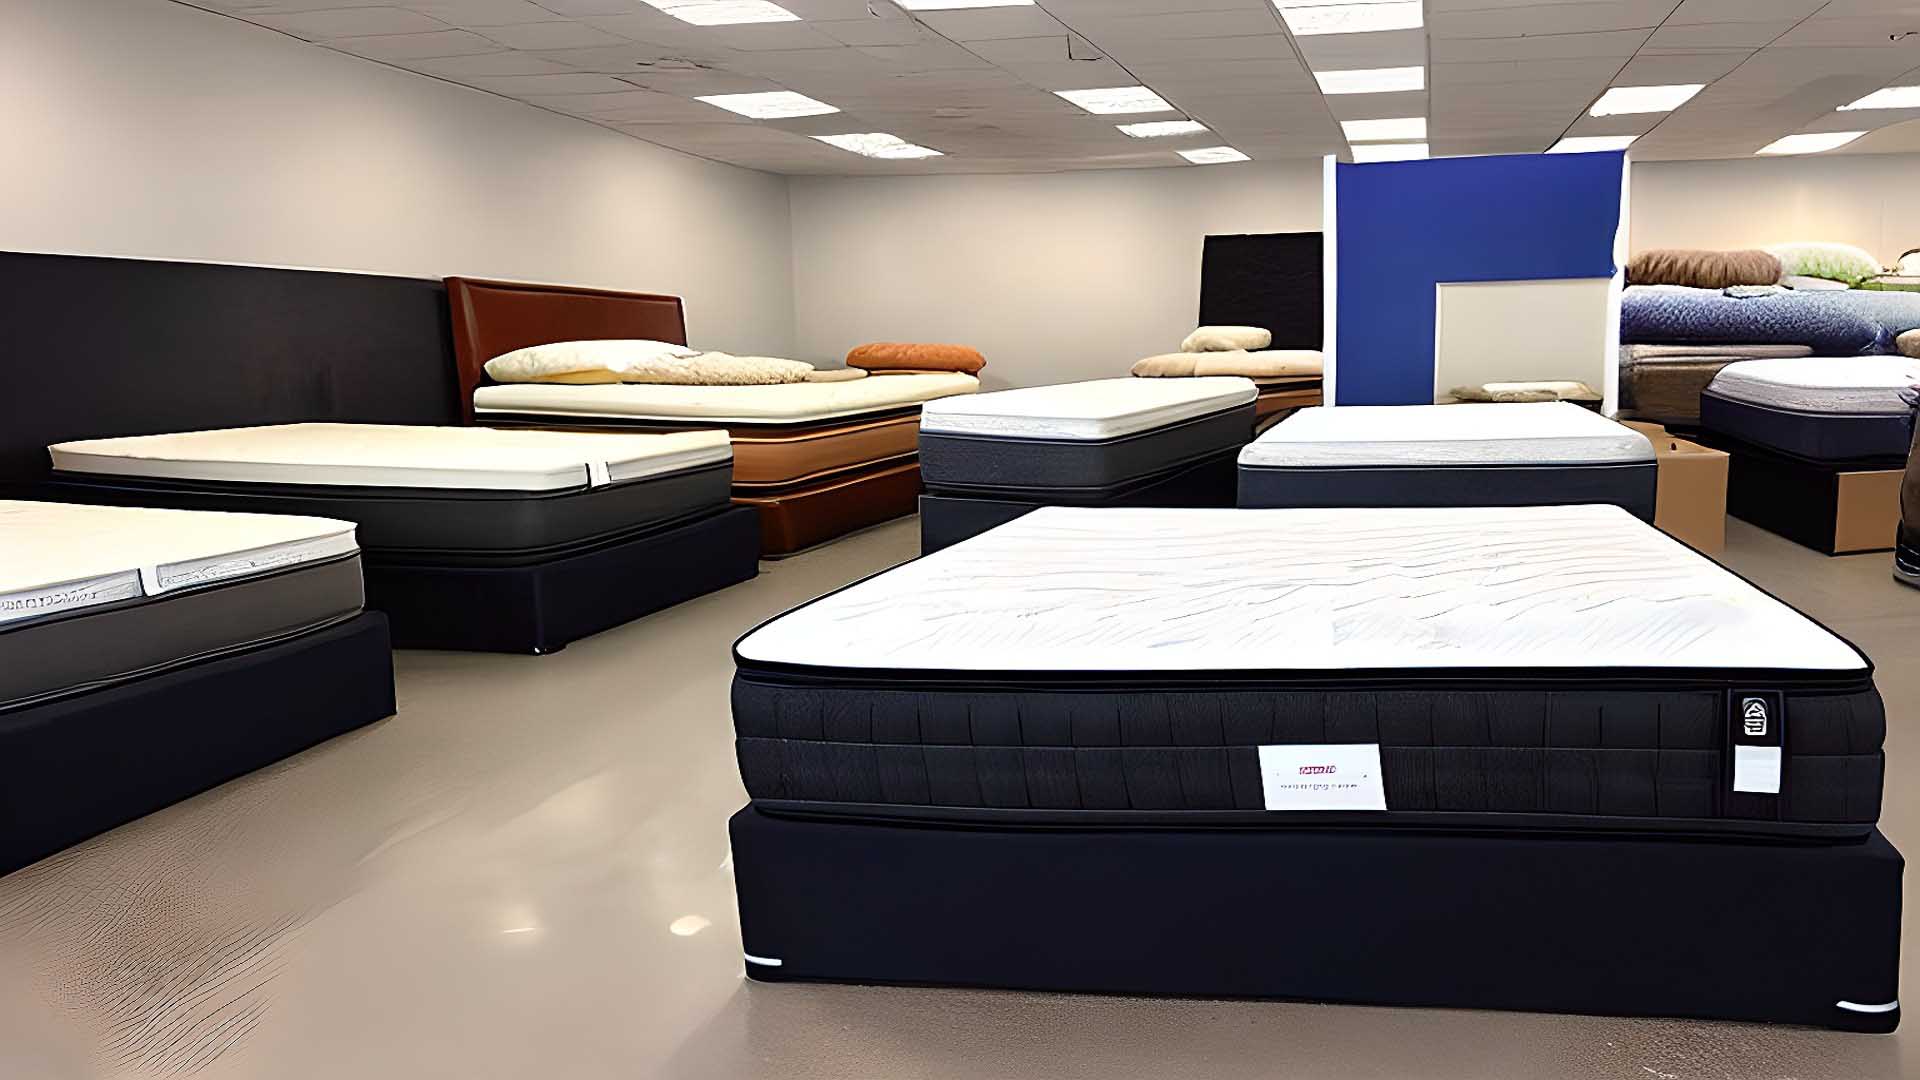 Mattress Sale in Fishers, Indiana